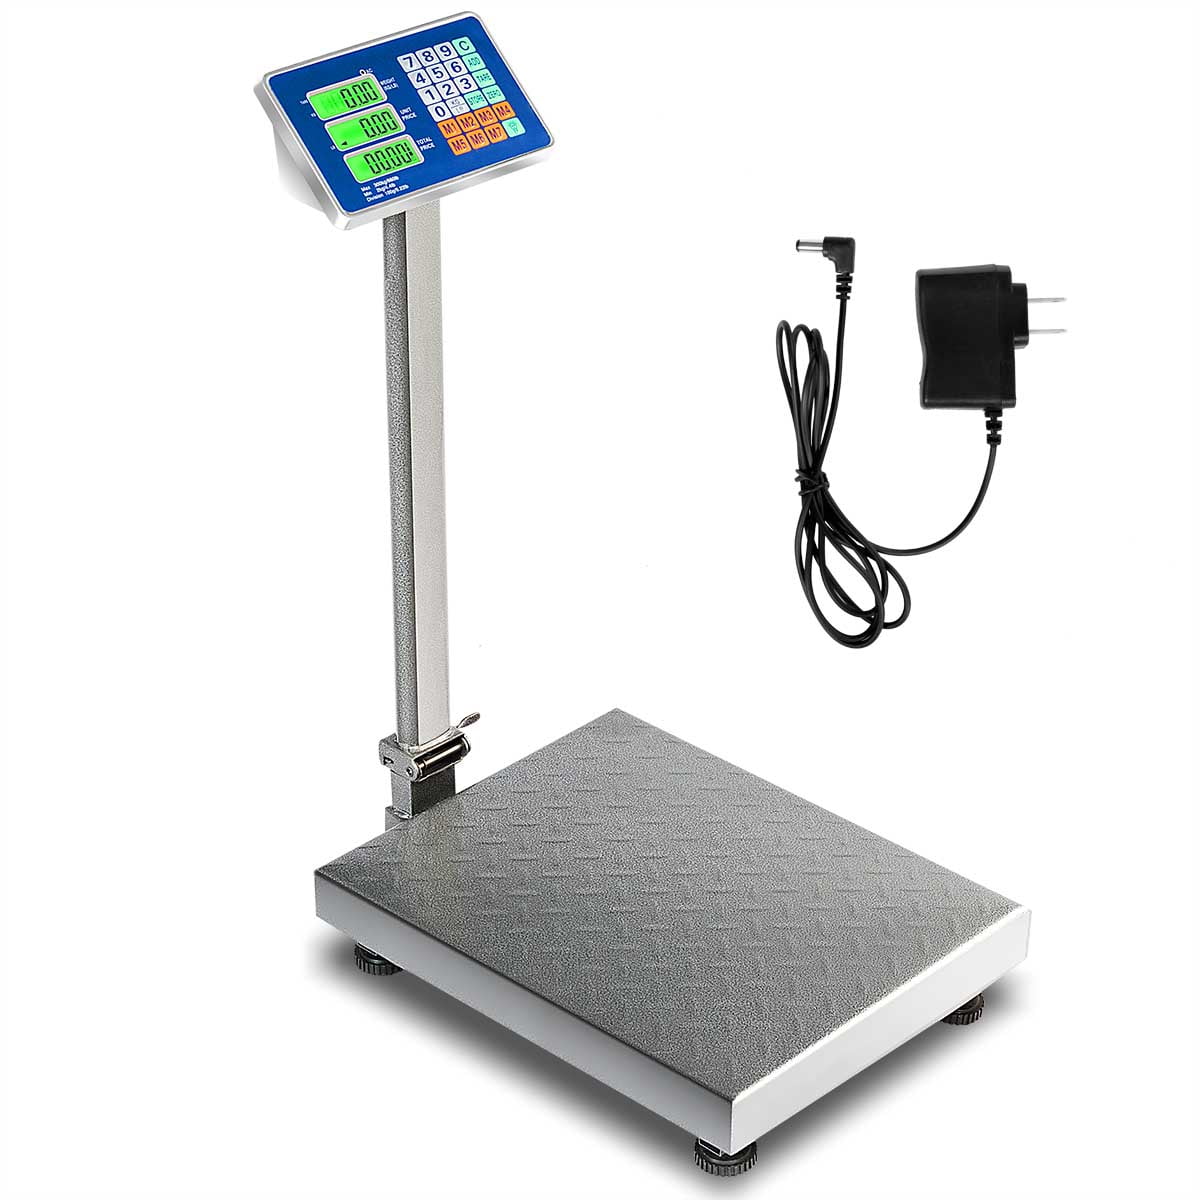 Fetcoi Professional Medical Floor Scale, 660 lb High Capacity Digital Physician Scale, Large Platform Wrestling Scale for Home Gym Hospital Use, Size